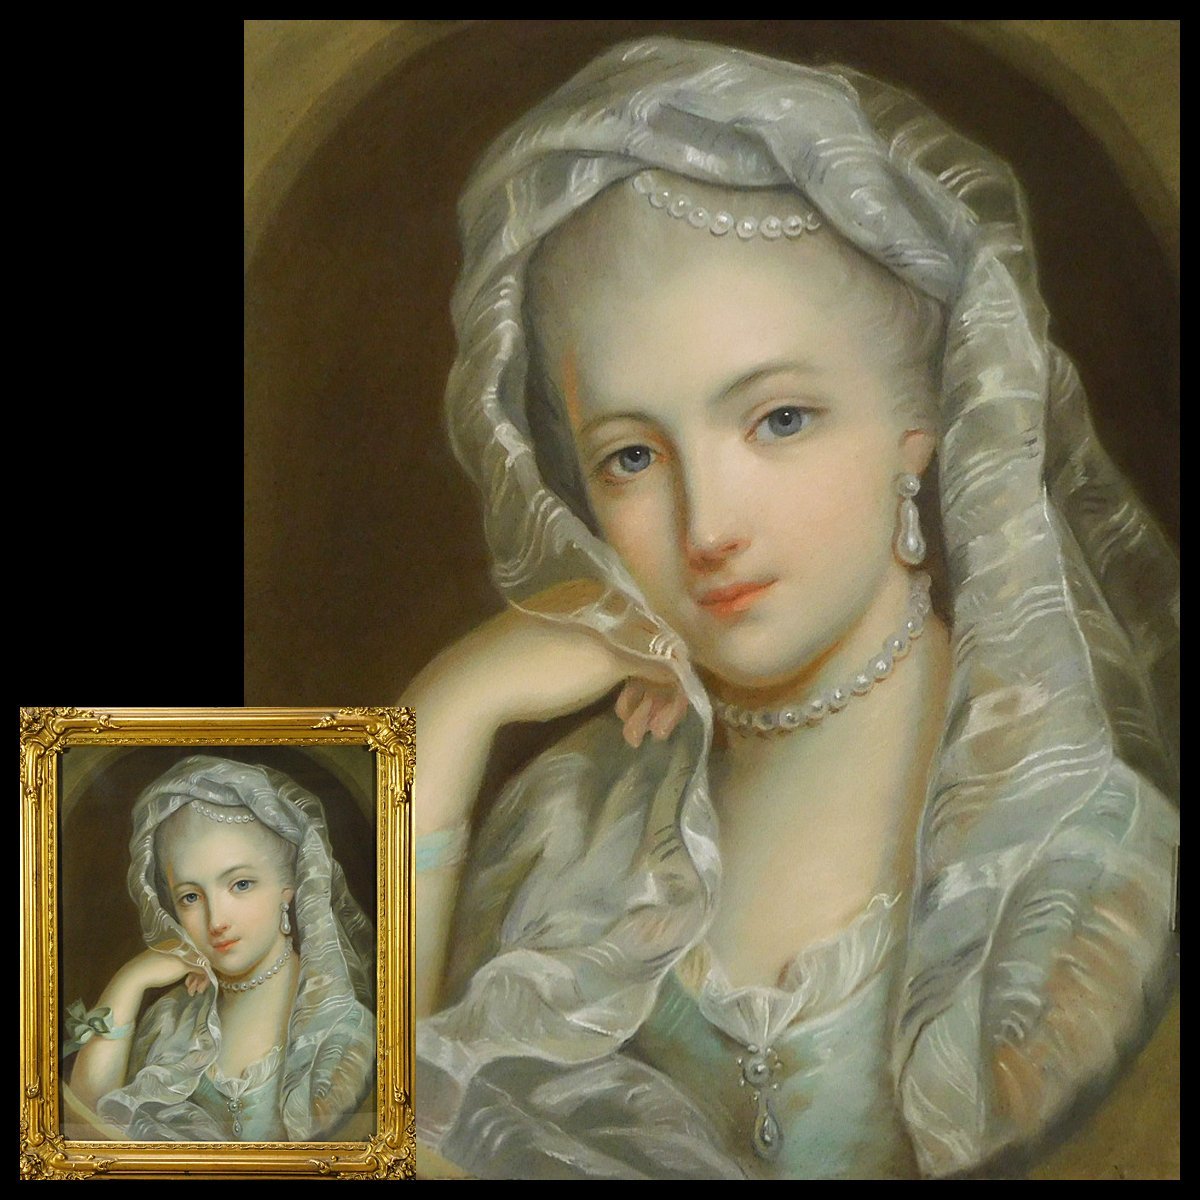 Legend of Maurice Quentin de La Tour, Lady (Beauty Painting), approx. 6, pastel, framed, sticker affixed, in wooden box s24030106, painting, oil painting, portrait